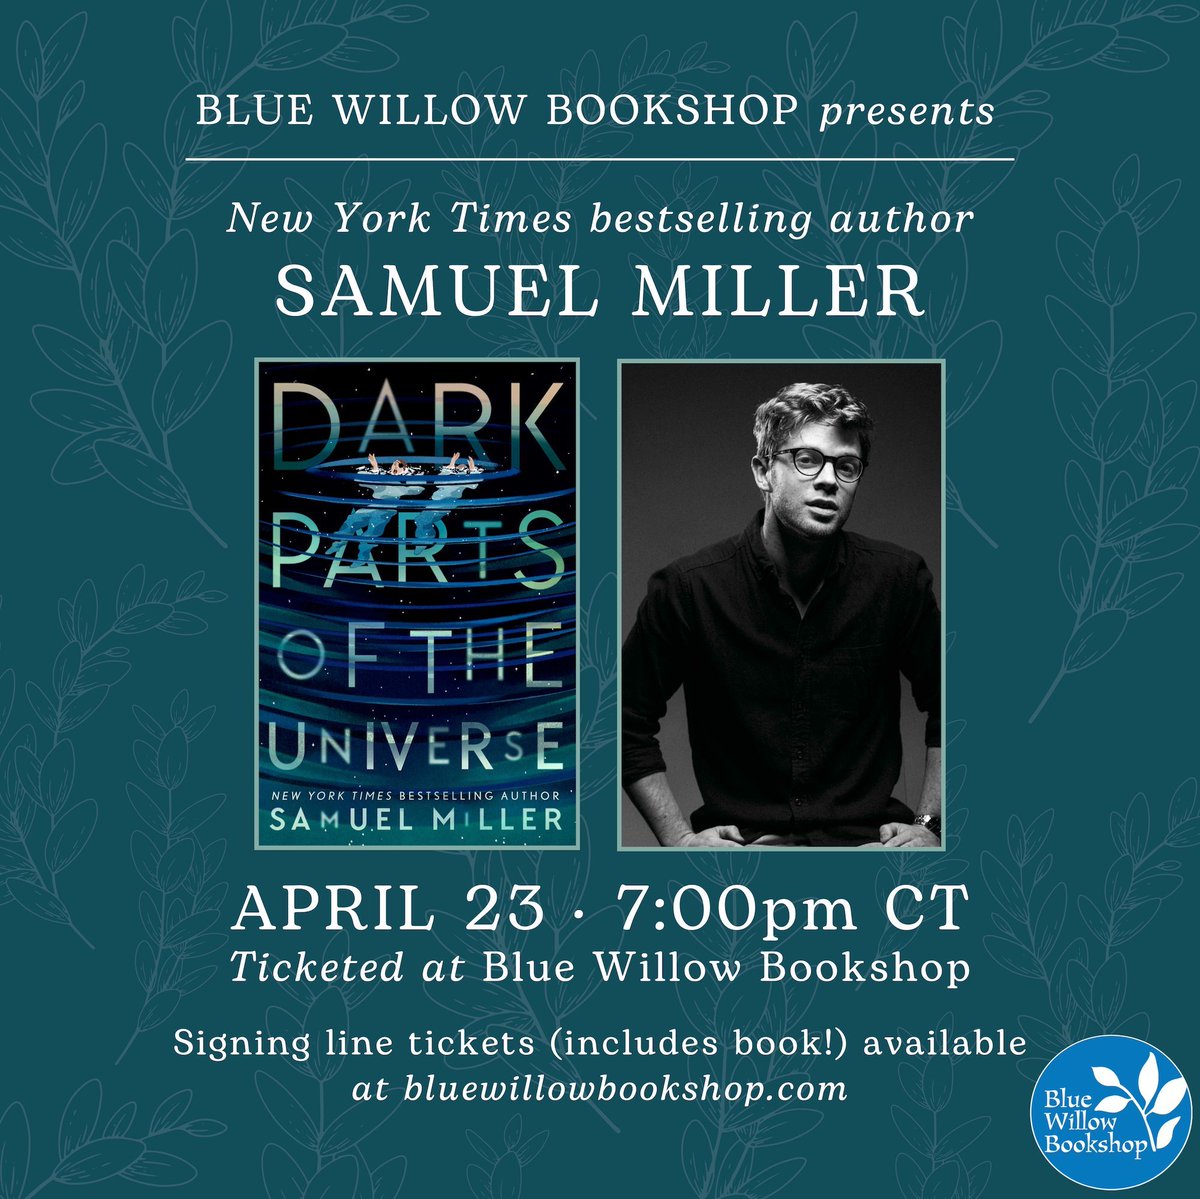 ✨Tomorrow,✨ we can't wait to welcome @samtwomiller to the bookshop to hear about his propulsive and genre-bending YA mystery, DARK PARTS OF THE UNIVERSE. Get your tickets now to join us, #Houston! bluewillowbookshop.com/event/miller-2… @KTegenBooks @EpicReads